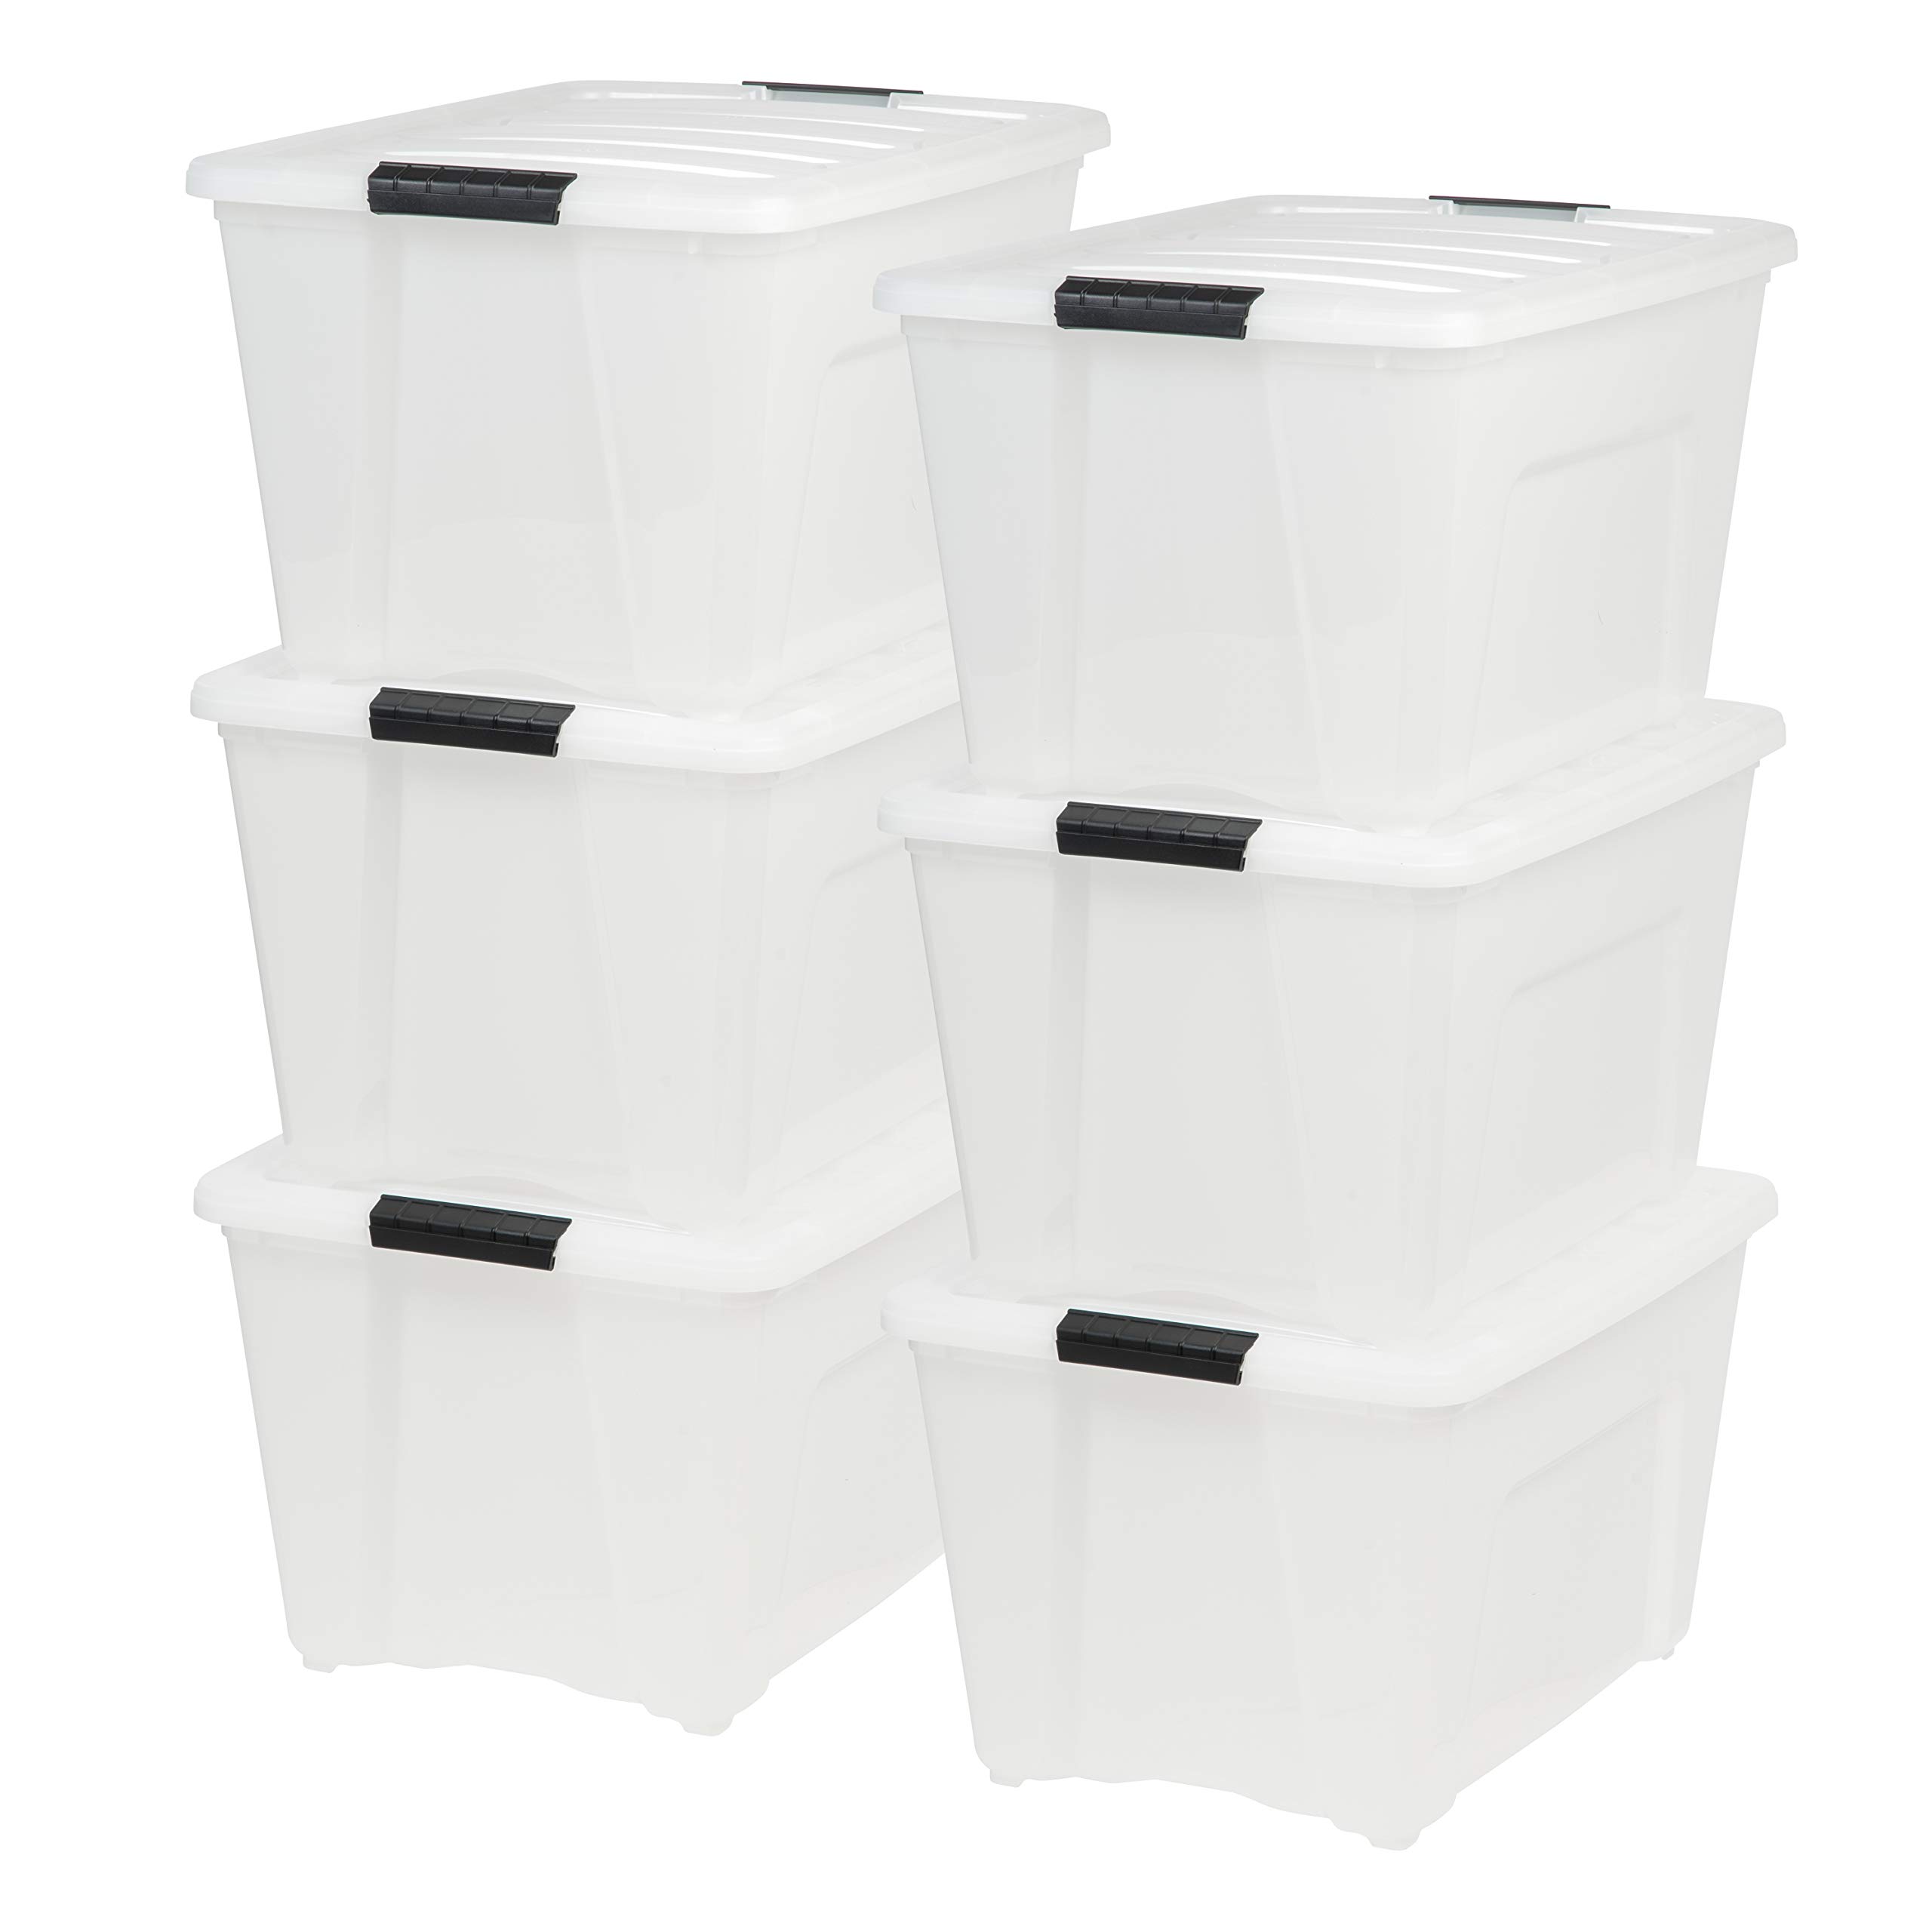  IRIS USA, Inc. IRIS USA 53 Qt. Plastic Storage Container Bin with Secure Lid and Latching Buckles, 6 pack - Pearl, Durable Stackable Nestable Organizing Tote Tub Box Sports General Organization Garage...